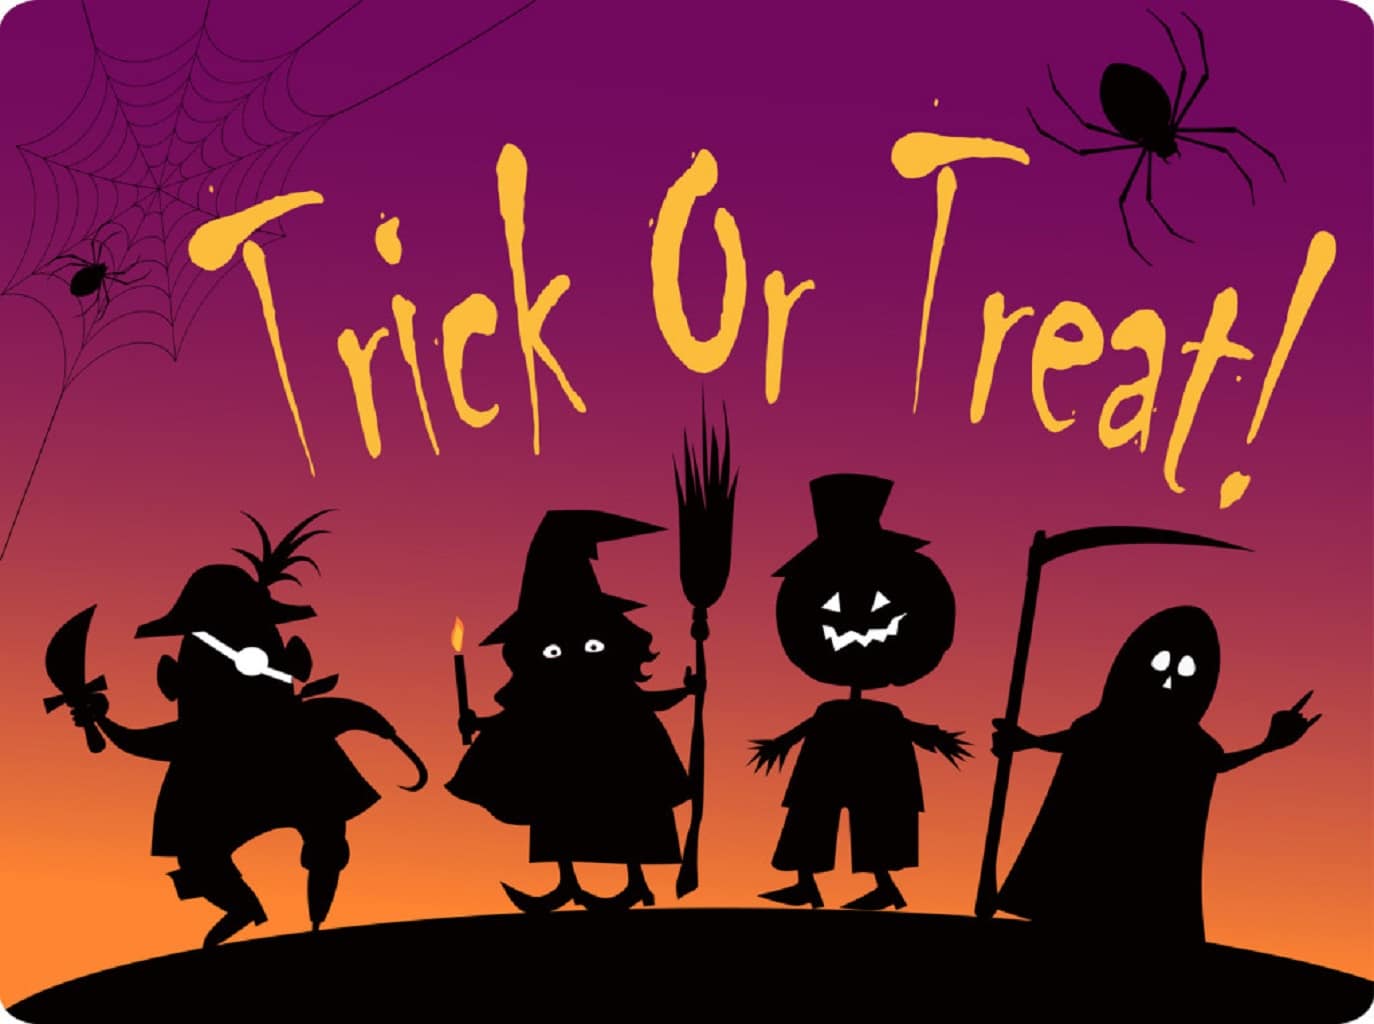 Whitewater TrickorTreat Guidelines for Sat., 10/31 Whitewater Banner